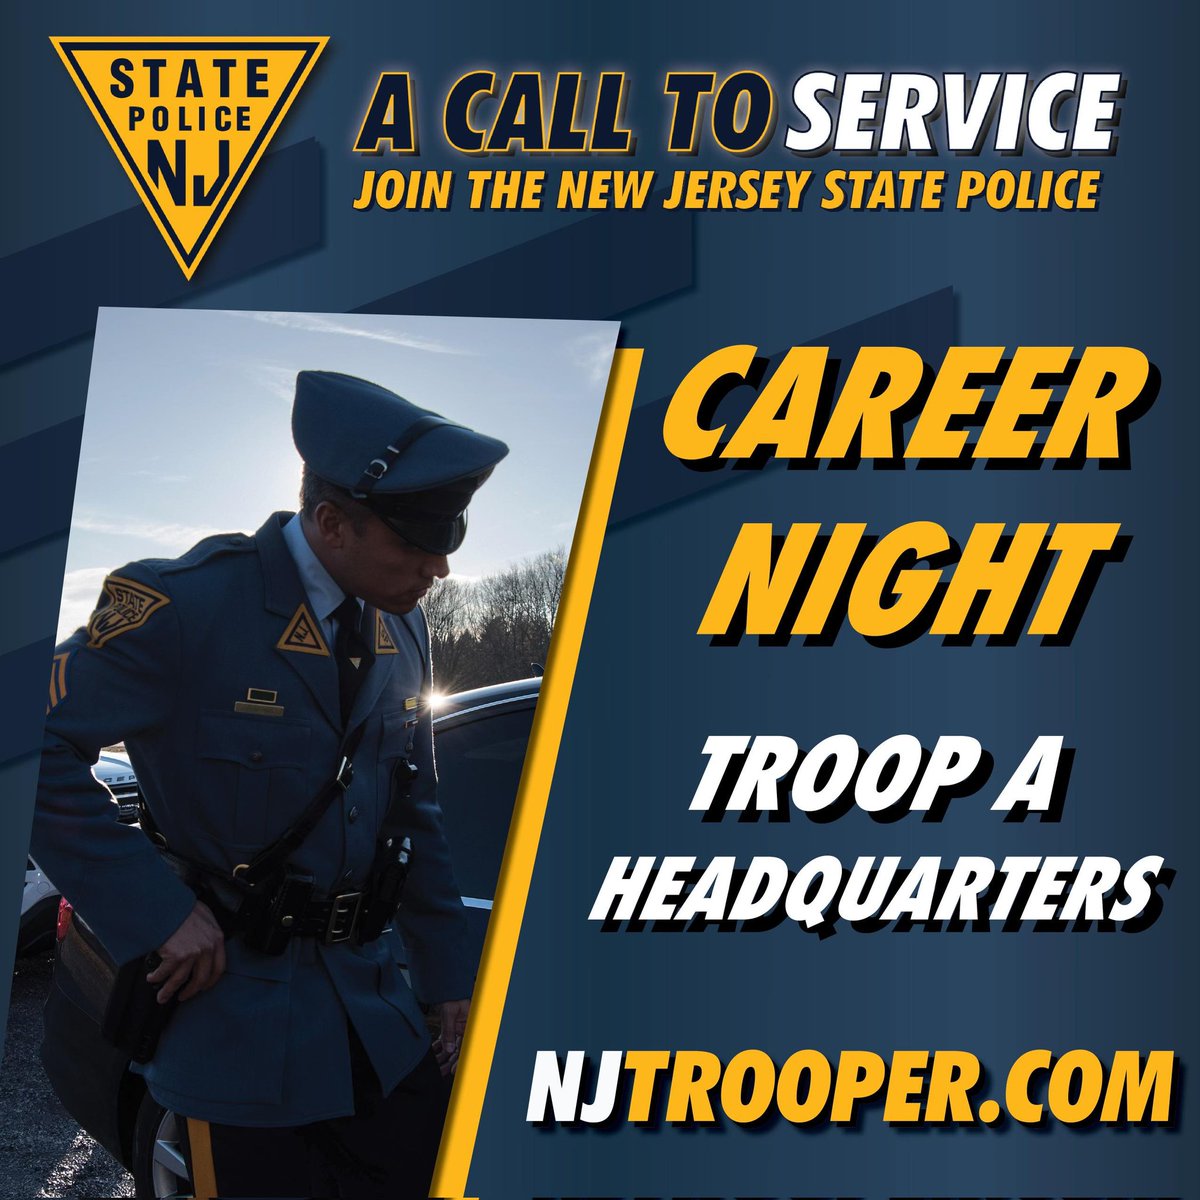 The New Jersey State Police Application window is currently open until May 3! The New Jersey State Police Recruiting Unit will host a career night at Troop “A” headquarters TODAY from 7 pm - 9 pm, located at 1045 Route 54 in Williamstown, N.J.